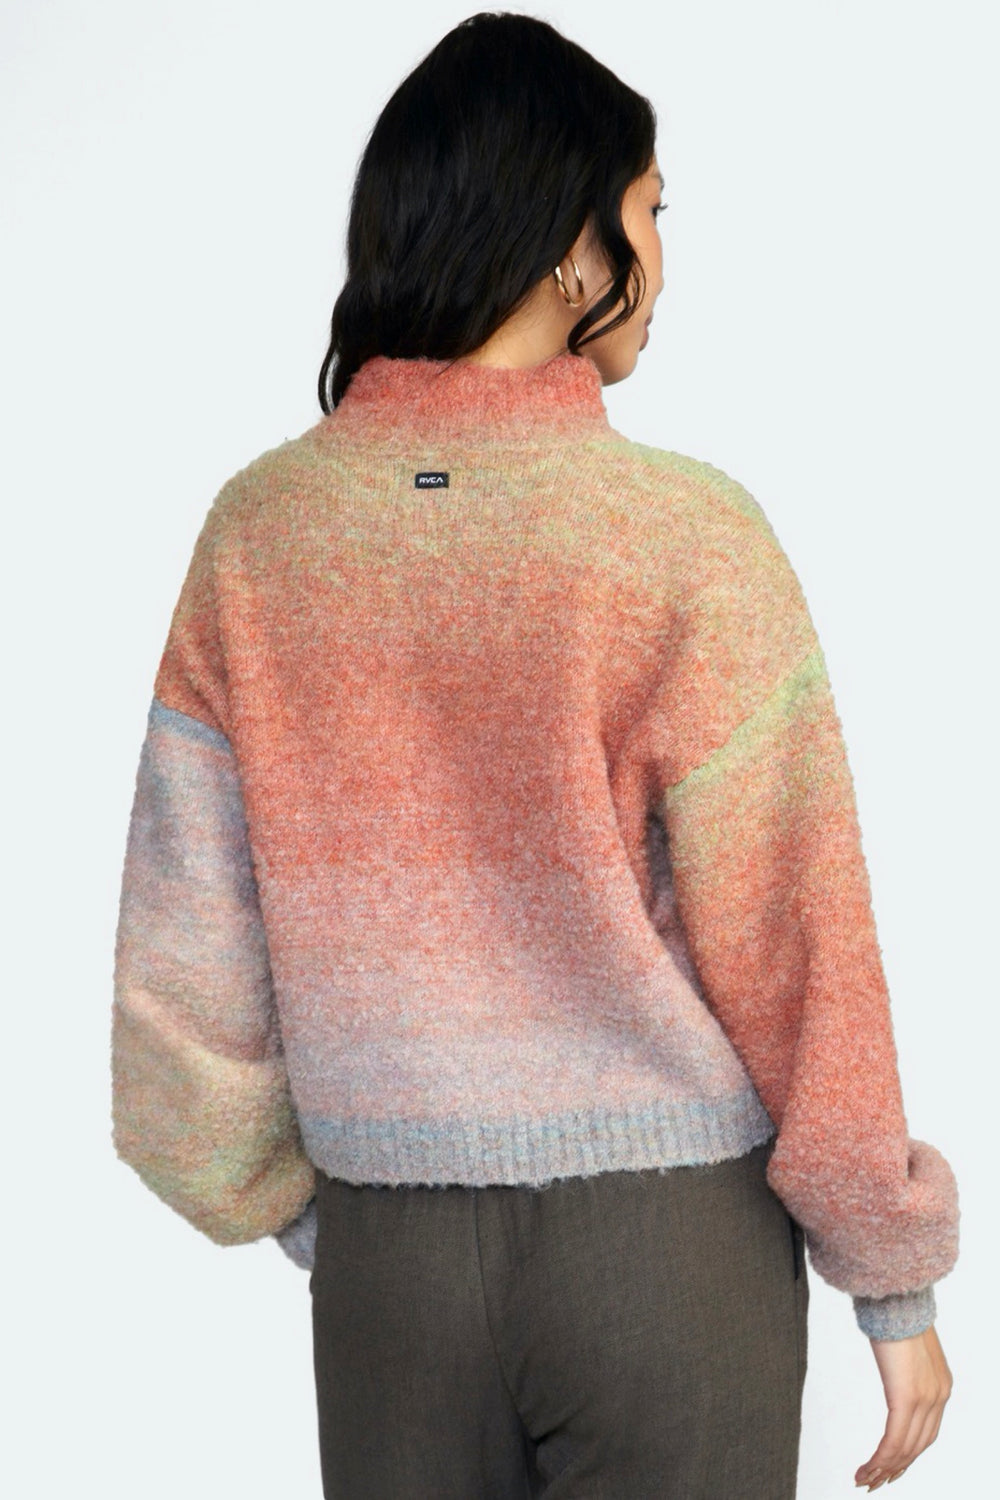 Dream Cycle Turtleneck Sweater